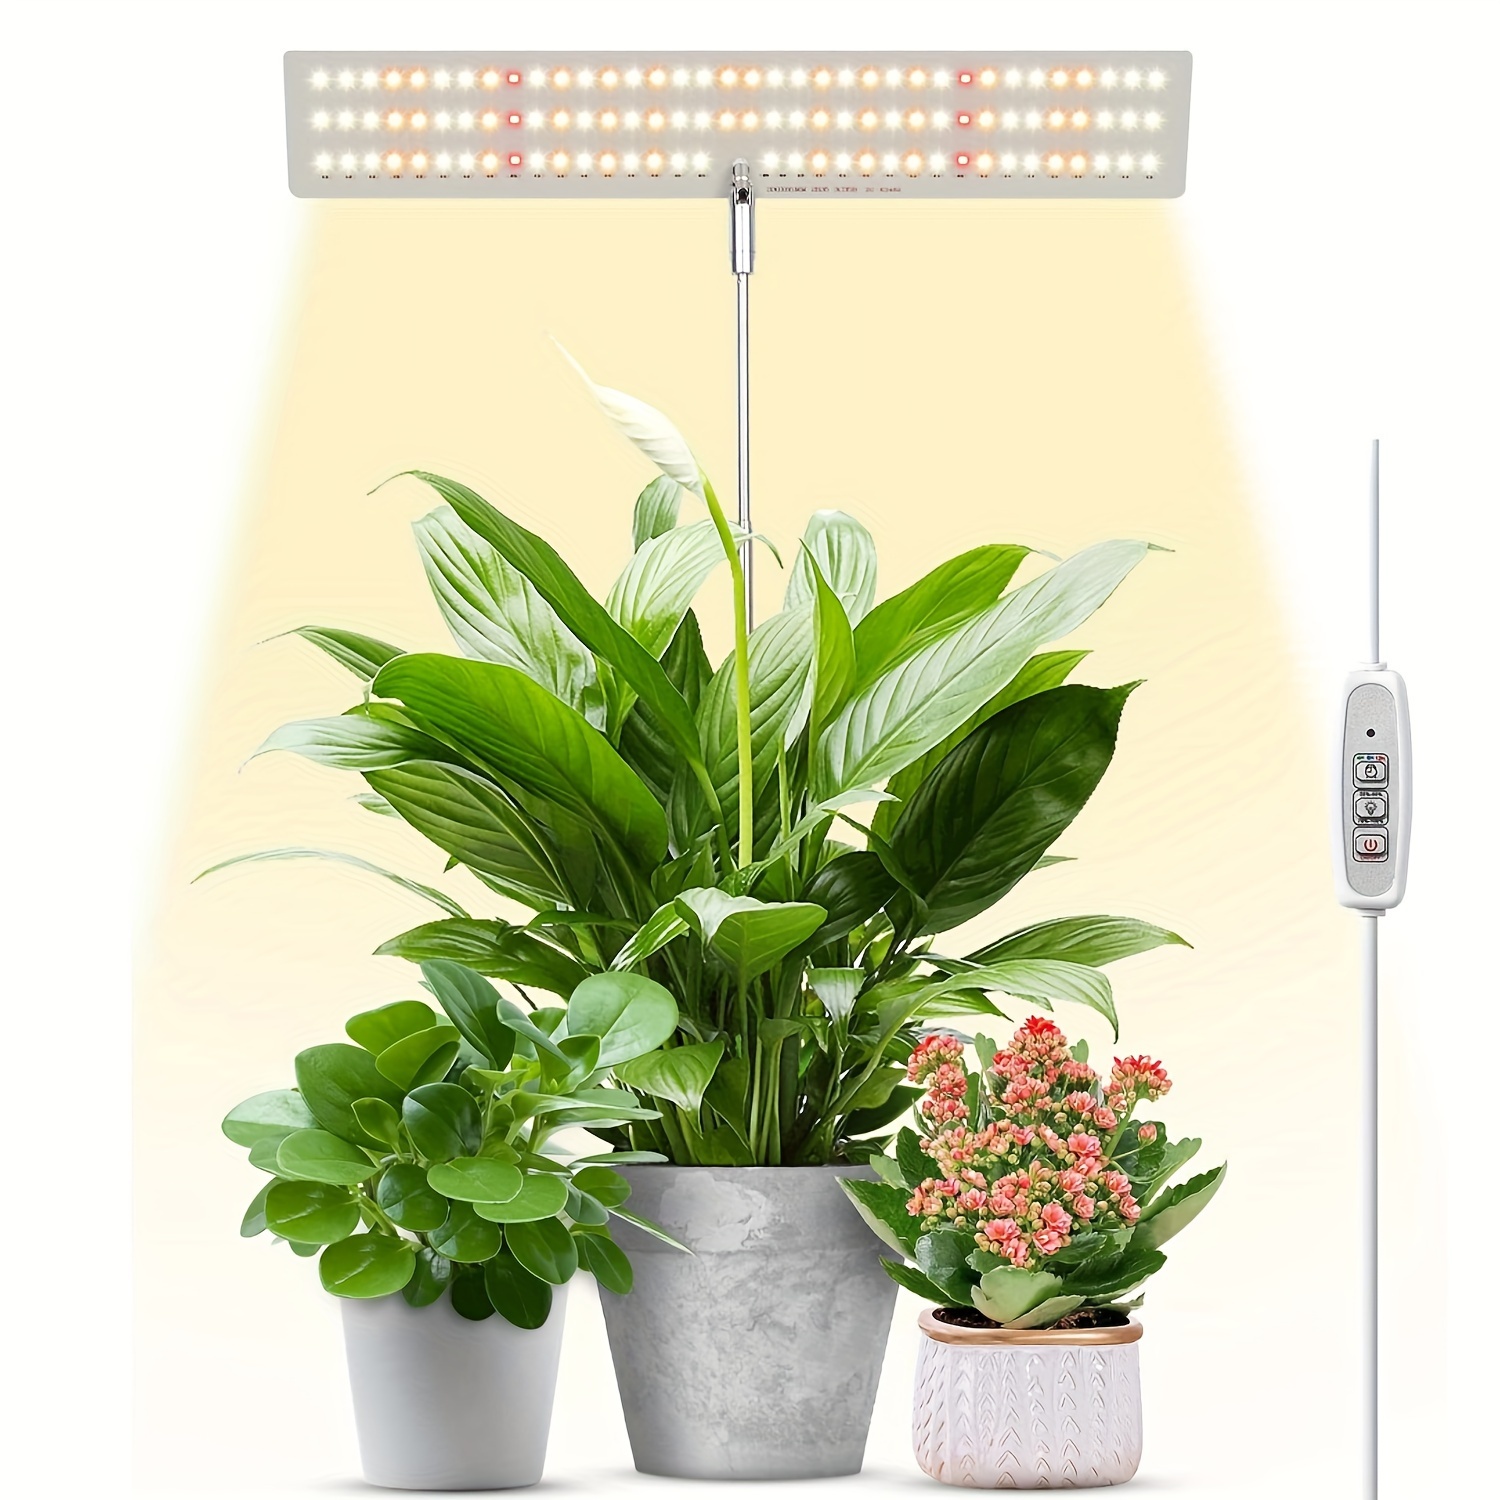  LORDEM Grow Light, Full Spectrum LED Plant Light for Indoor  Plants, Height Adjustable Growing Lamp with Auto On/Off Timer 4/8/12H, 4  Dimmable Brightness, Ideal for Small Plants : Patio, Lawn